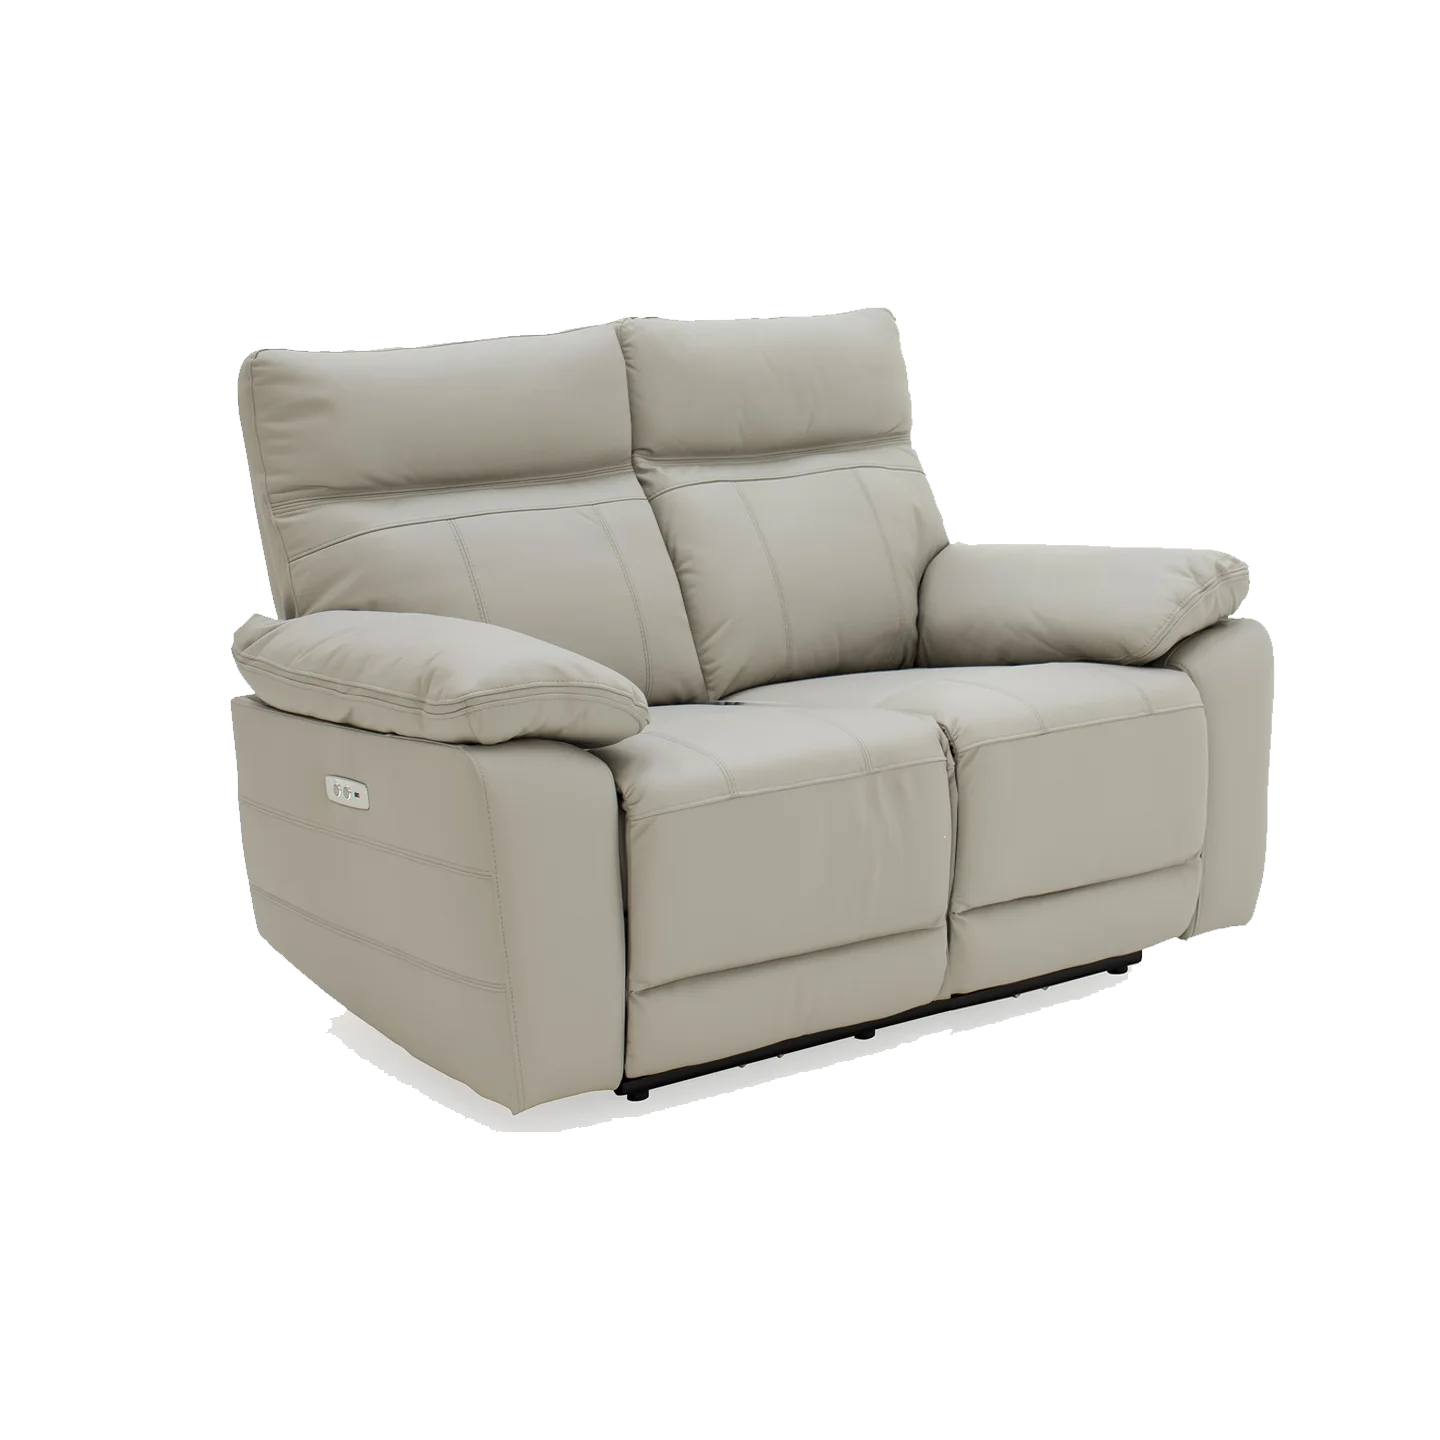 Positano Light Grey Leather 2 Seater Electric Recliner Sofa